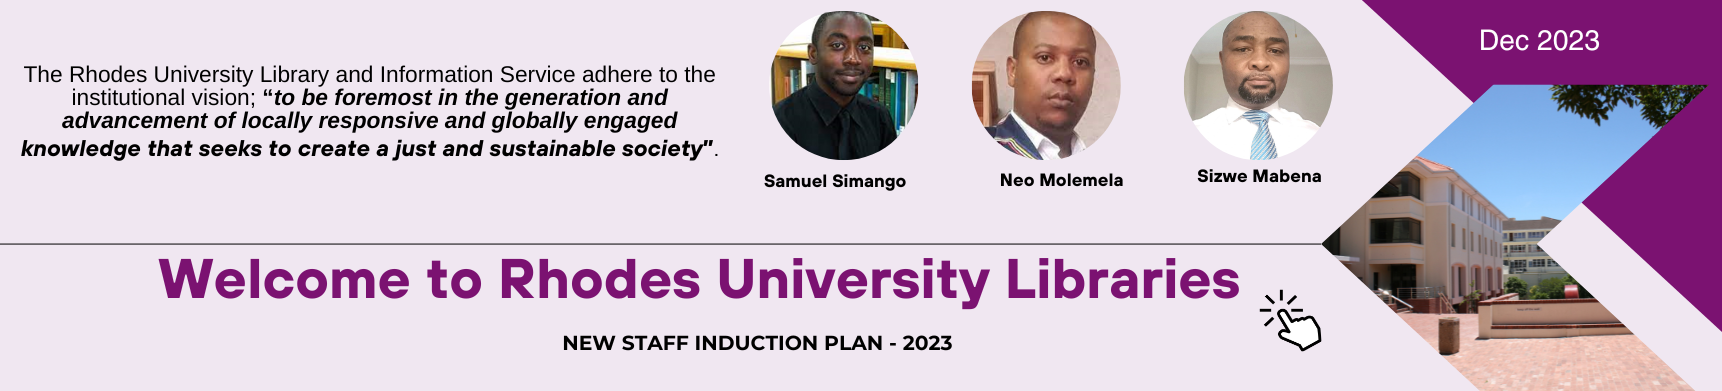 Rhodes University Library welcomes new staff members